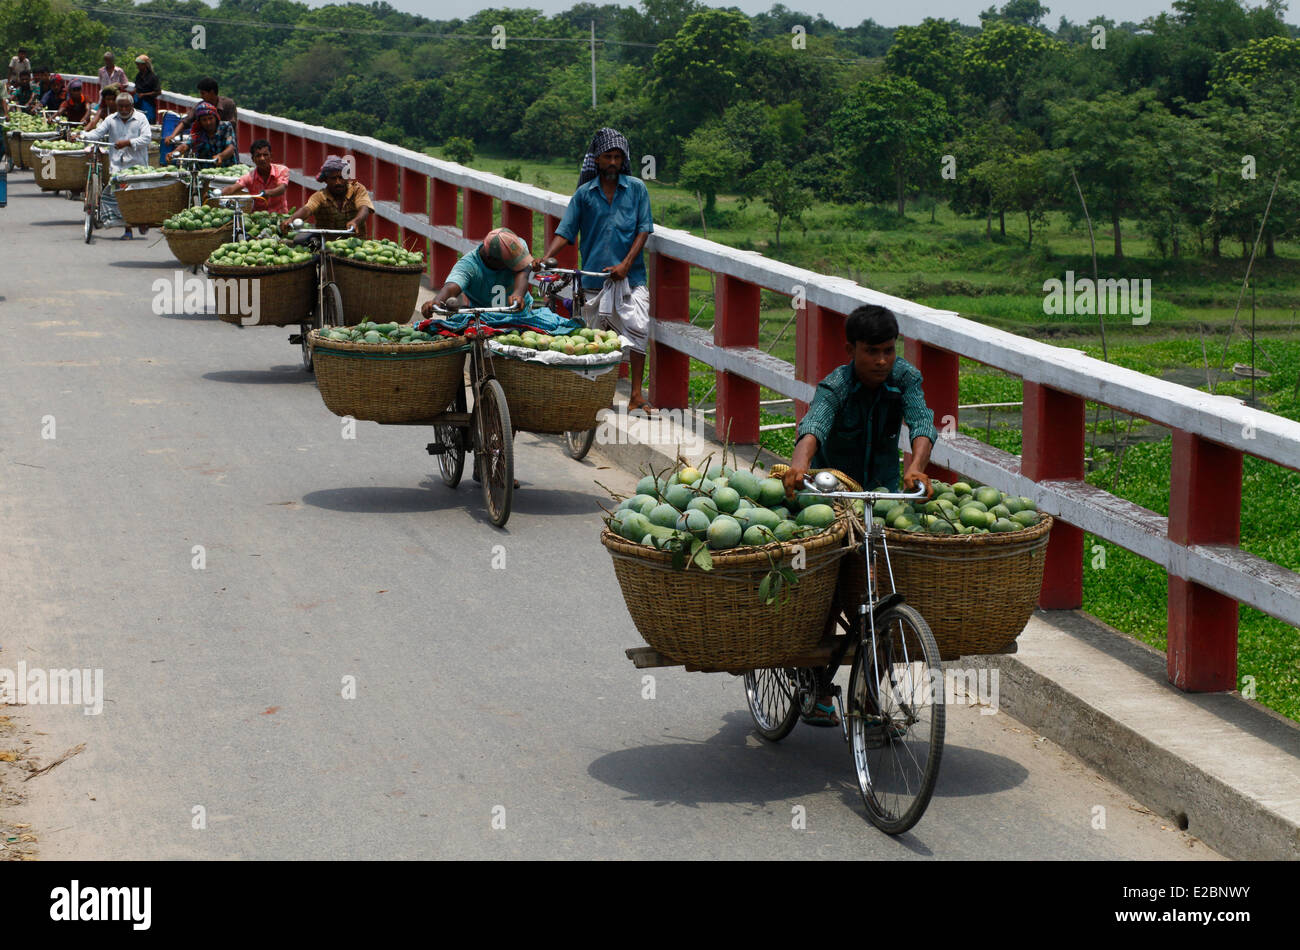 Chapainawabganj, Bangladesh, 17th June, 2014. People carrying mango from garden to mango market for sale in Bangladesh. Bangladesh generally produces about 800,000 metric tons of mangoes on 51,000 hectors of land. Chapainawabganj alone produces almost 200,000 tons of mangoes on 23,282 hectares of land. Credit:  zakir hossain chowdhury zakir/Alamy Live News Stock Photo